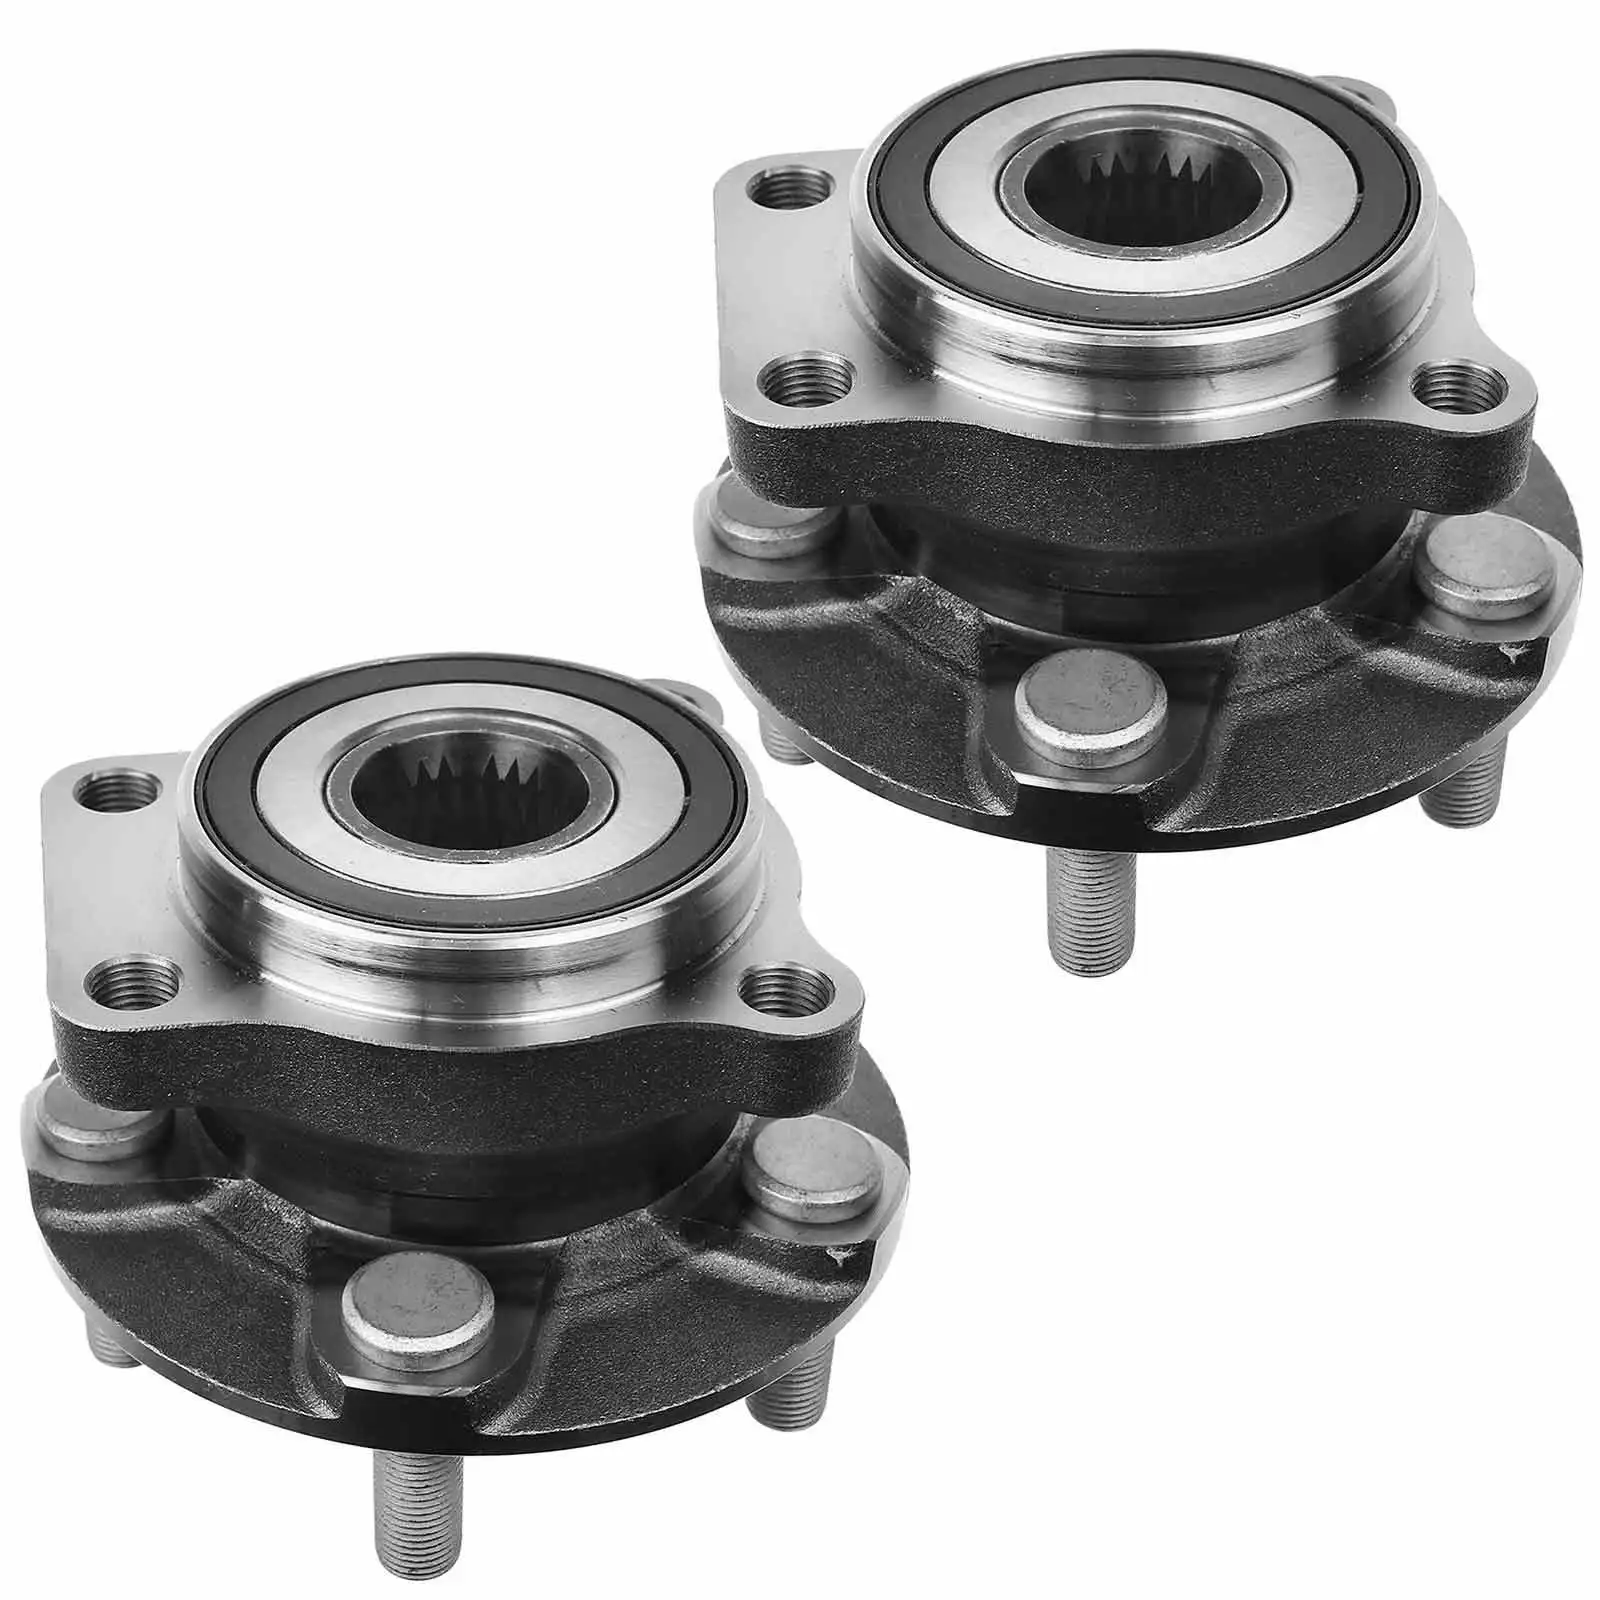 

2x Front Left & Right Wheel Hub and Bearing Assembly for Subaru Legacy Outback